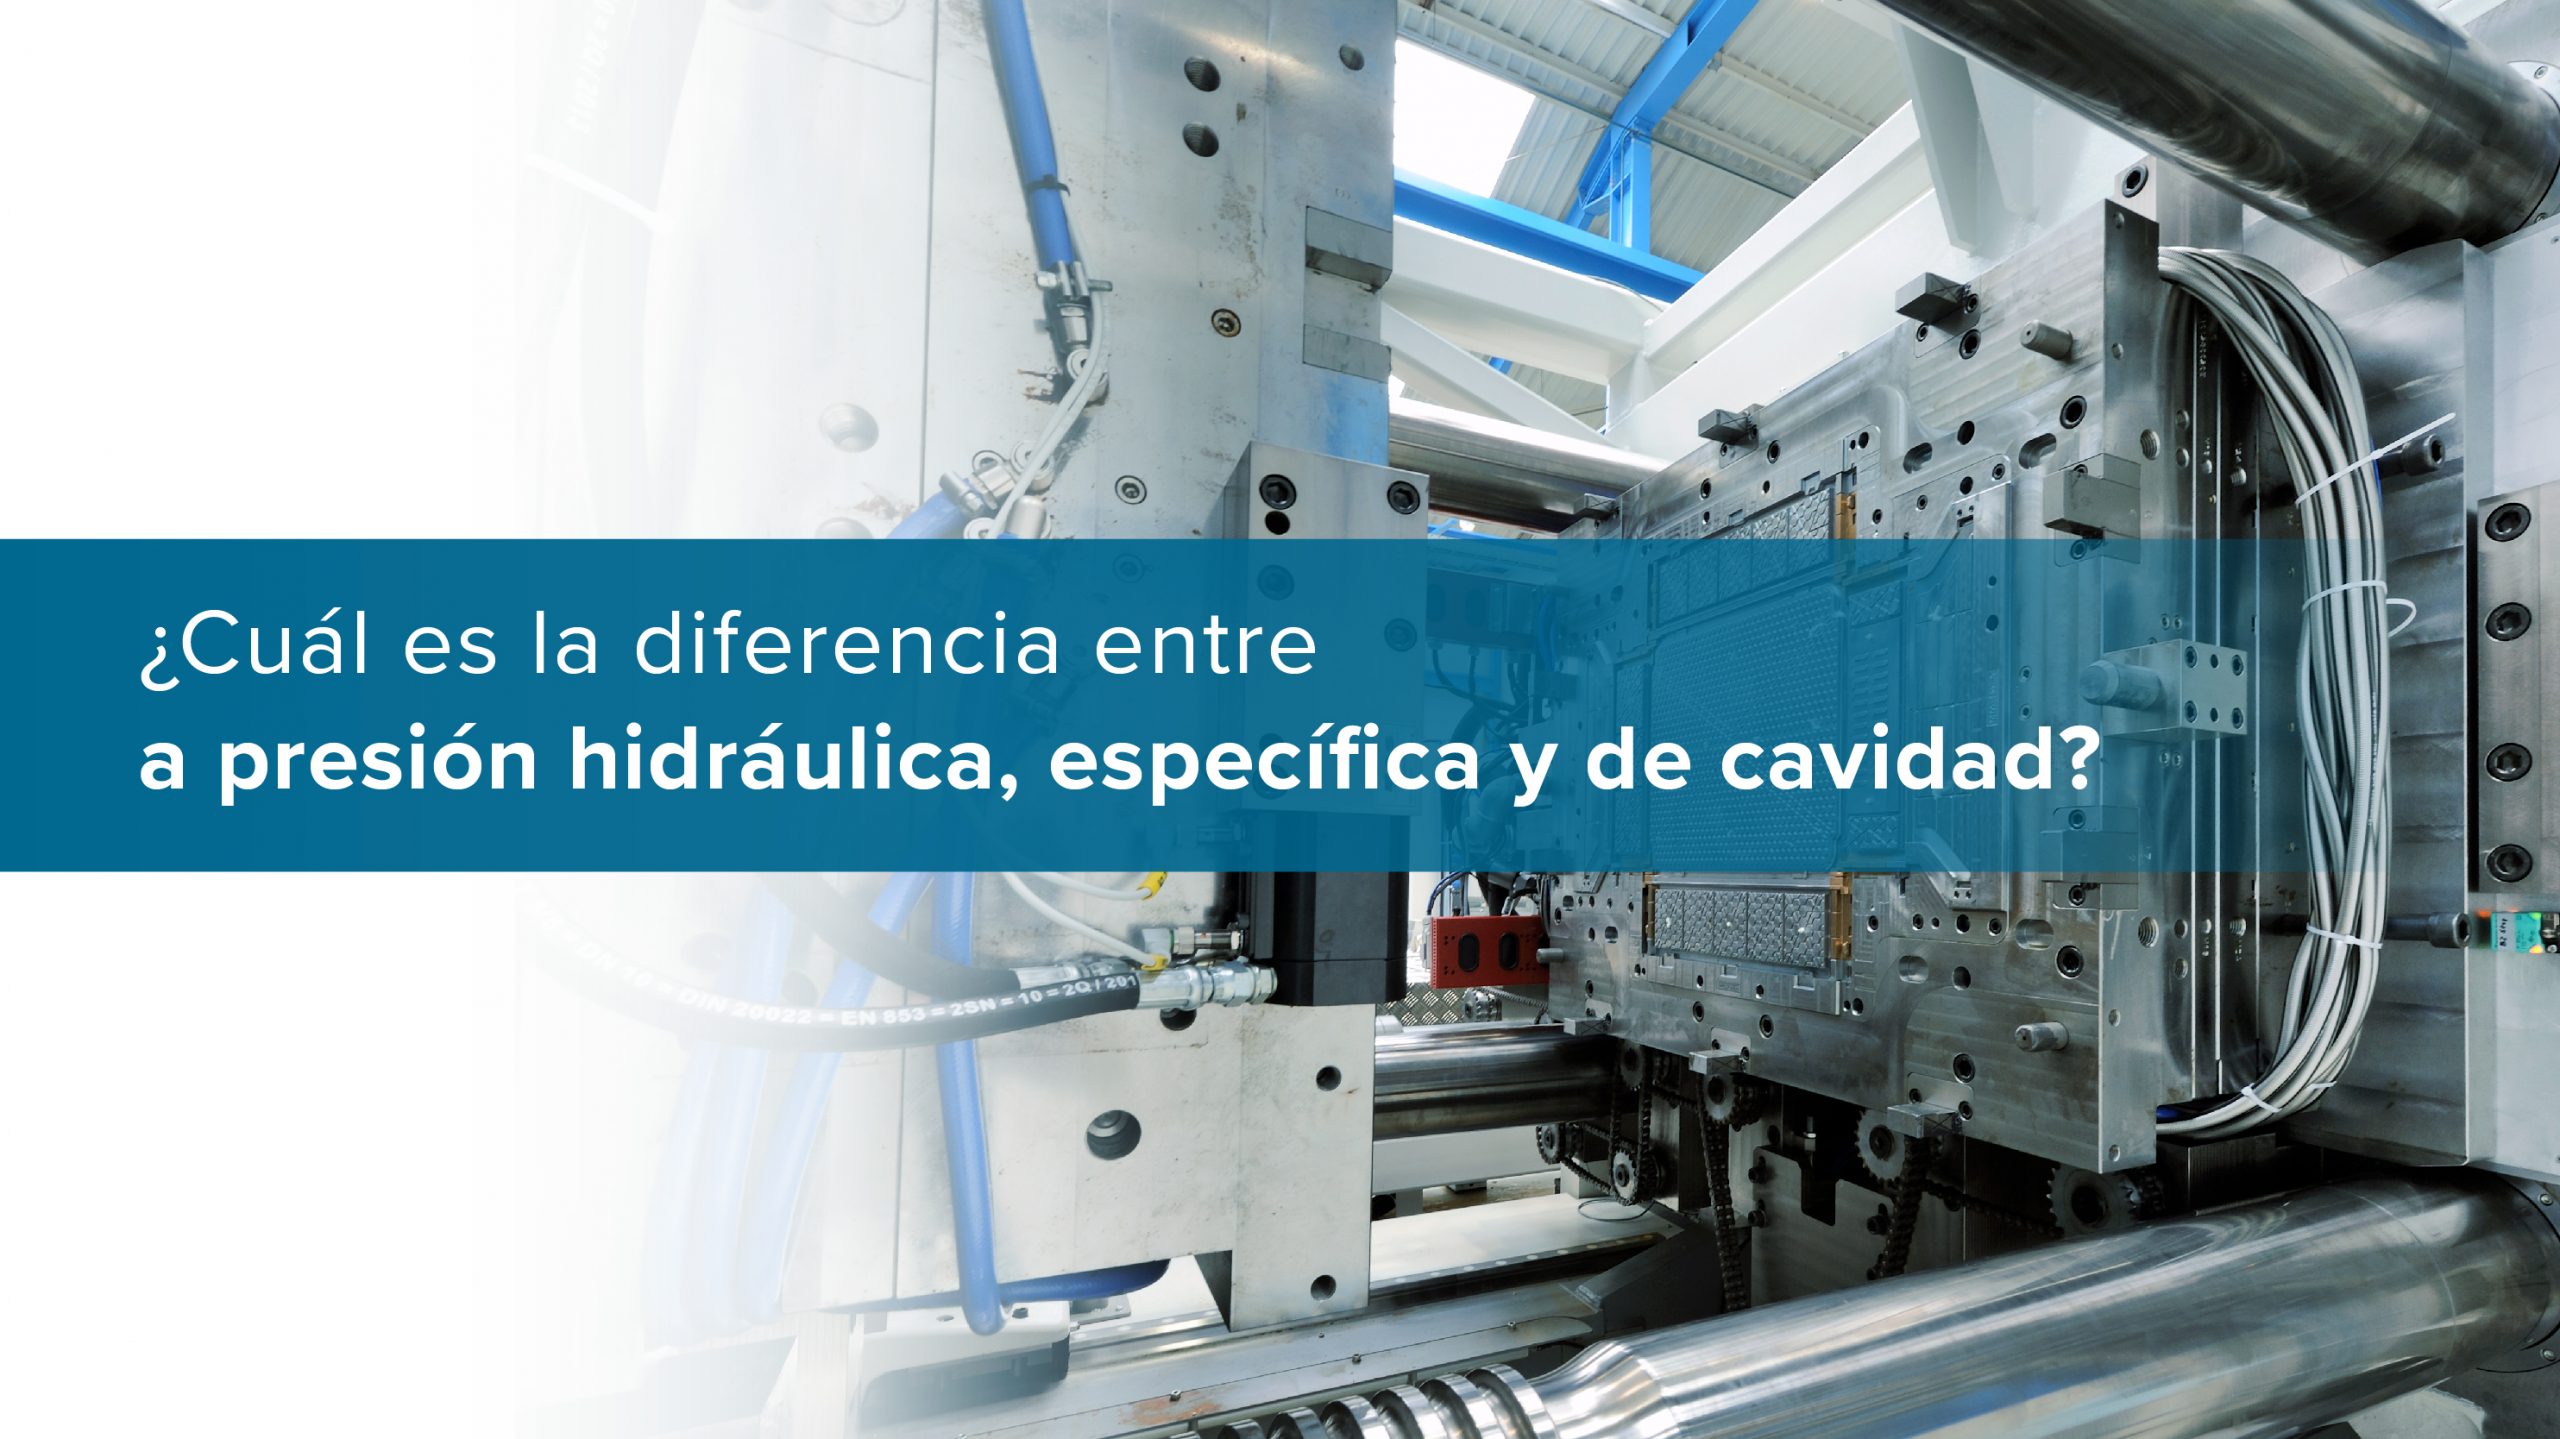 What Is the Difference Between Hydraulic Specific and Cavity Pressure - ES_Social